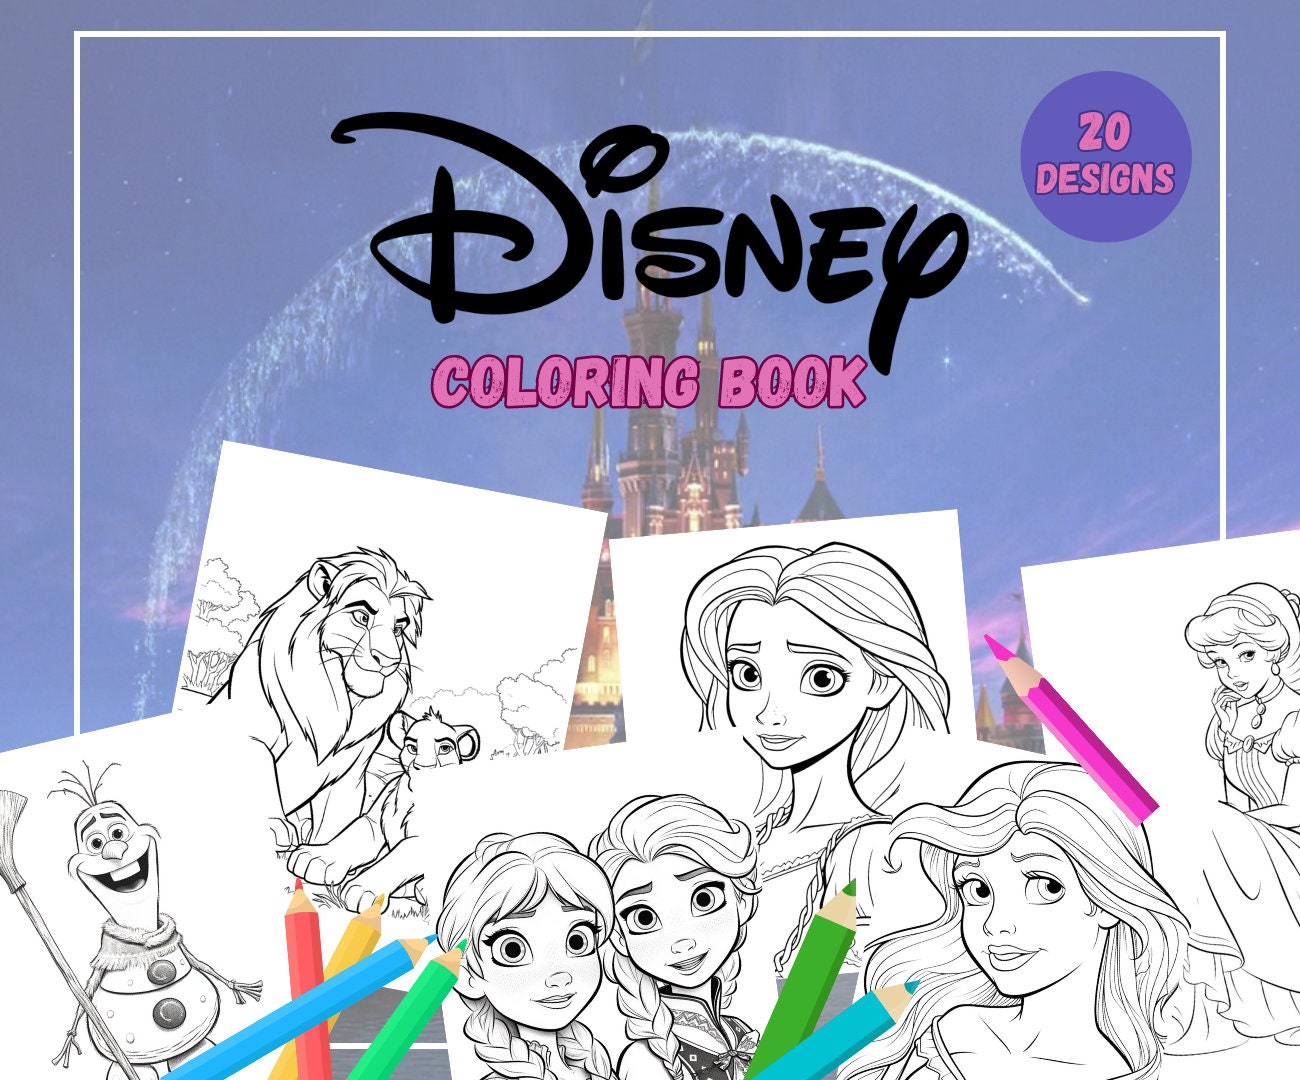 Fairytale Princess Coloring Book for Kids & Adults 